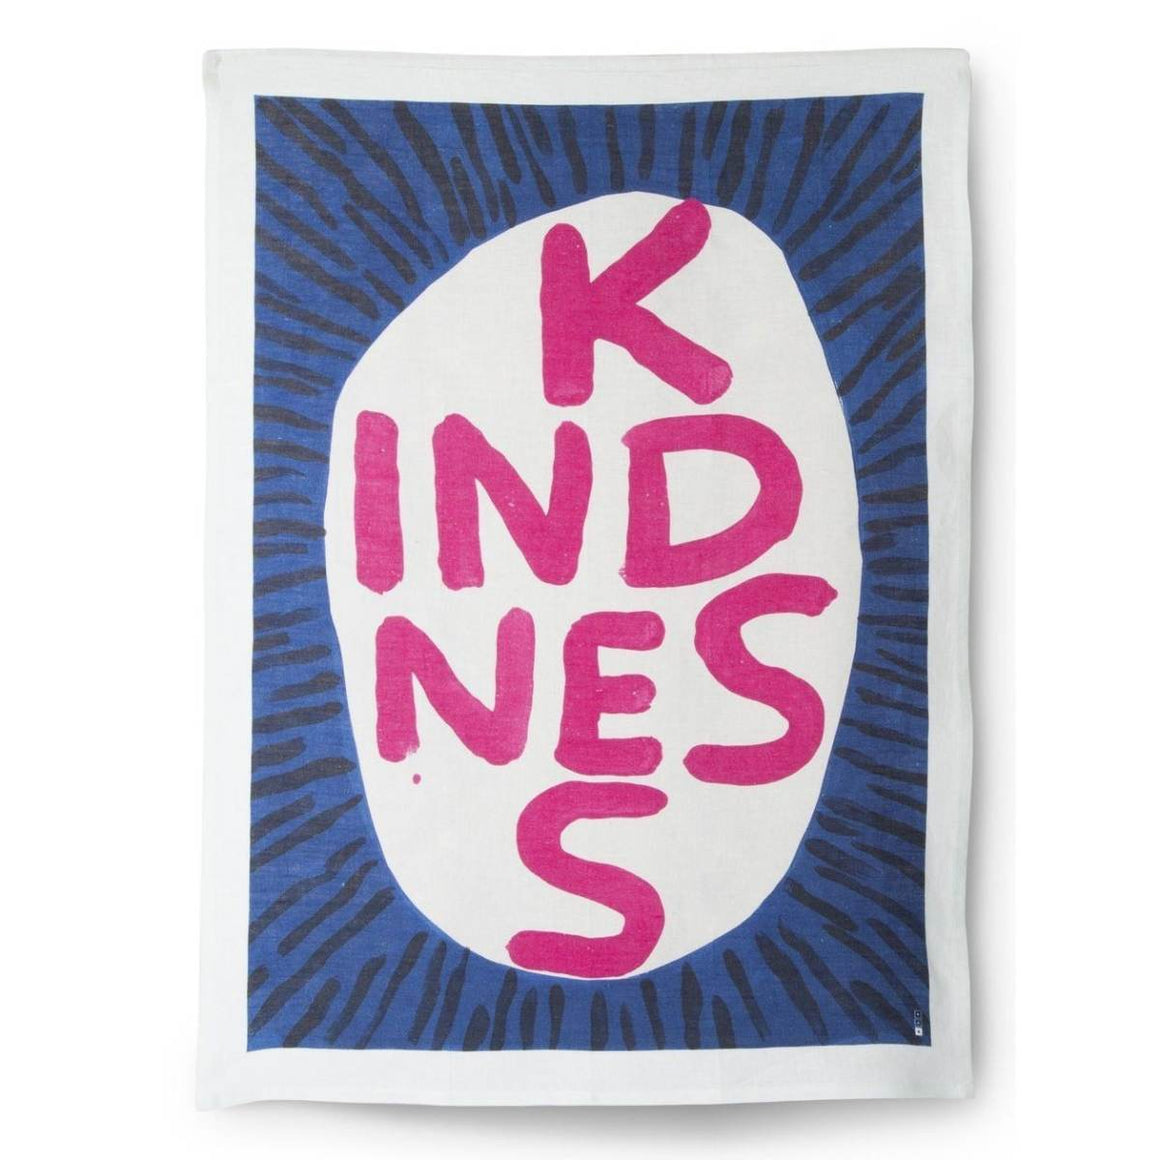 A white rectangular tea towel with a hand-painted capitalised text, 'KINDNESS' in pink inside a white circle surrounded by black lines on a cobalt background.